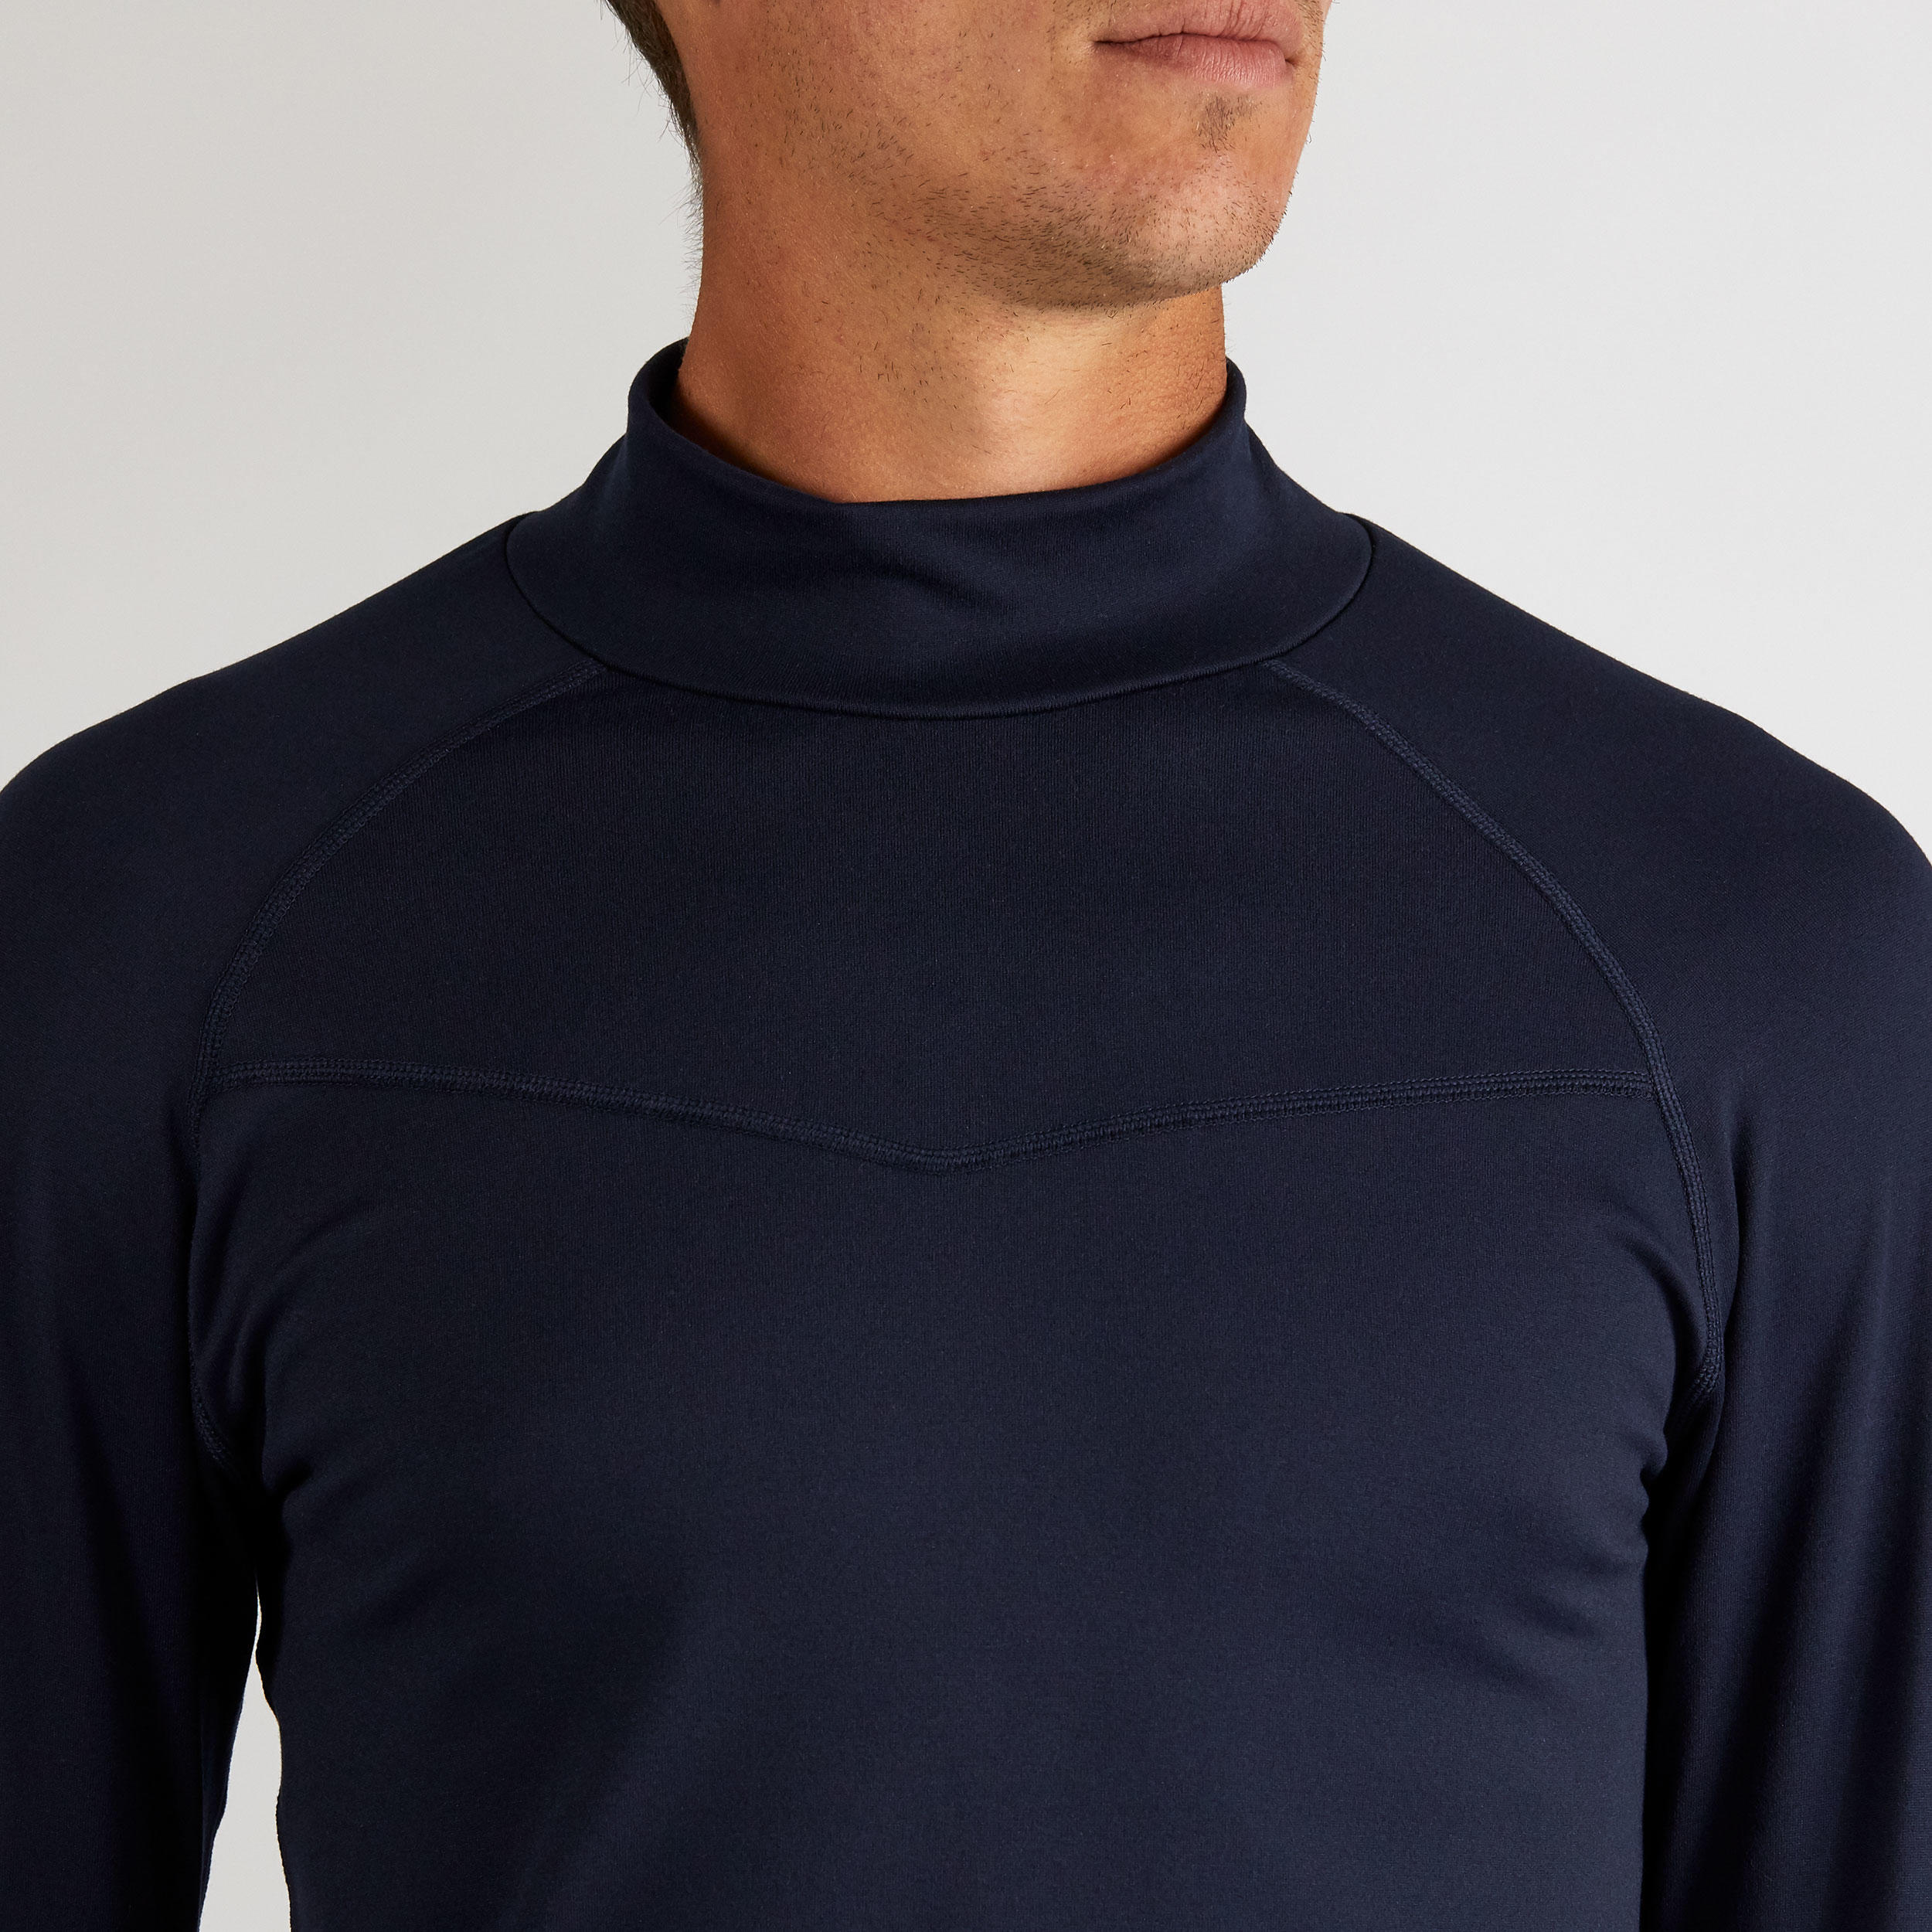 Men's Thermal base layer for golf - CW500 navy blue 3/5